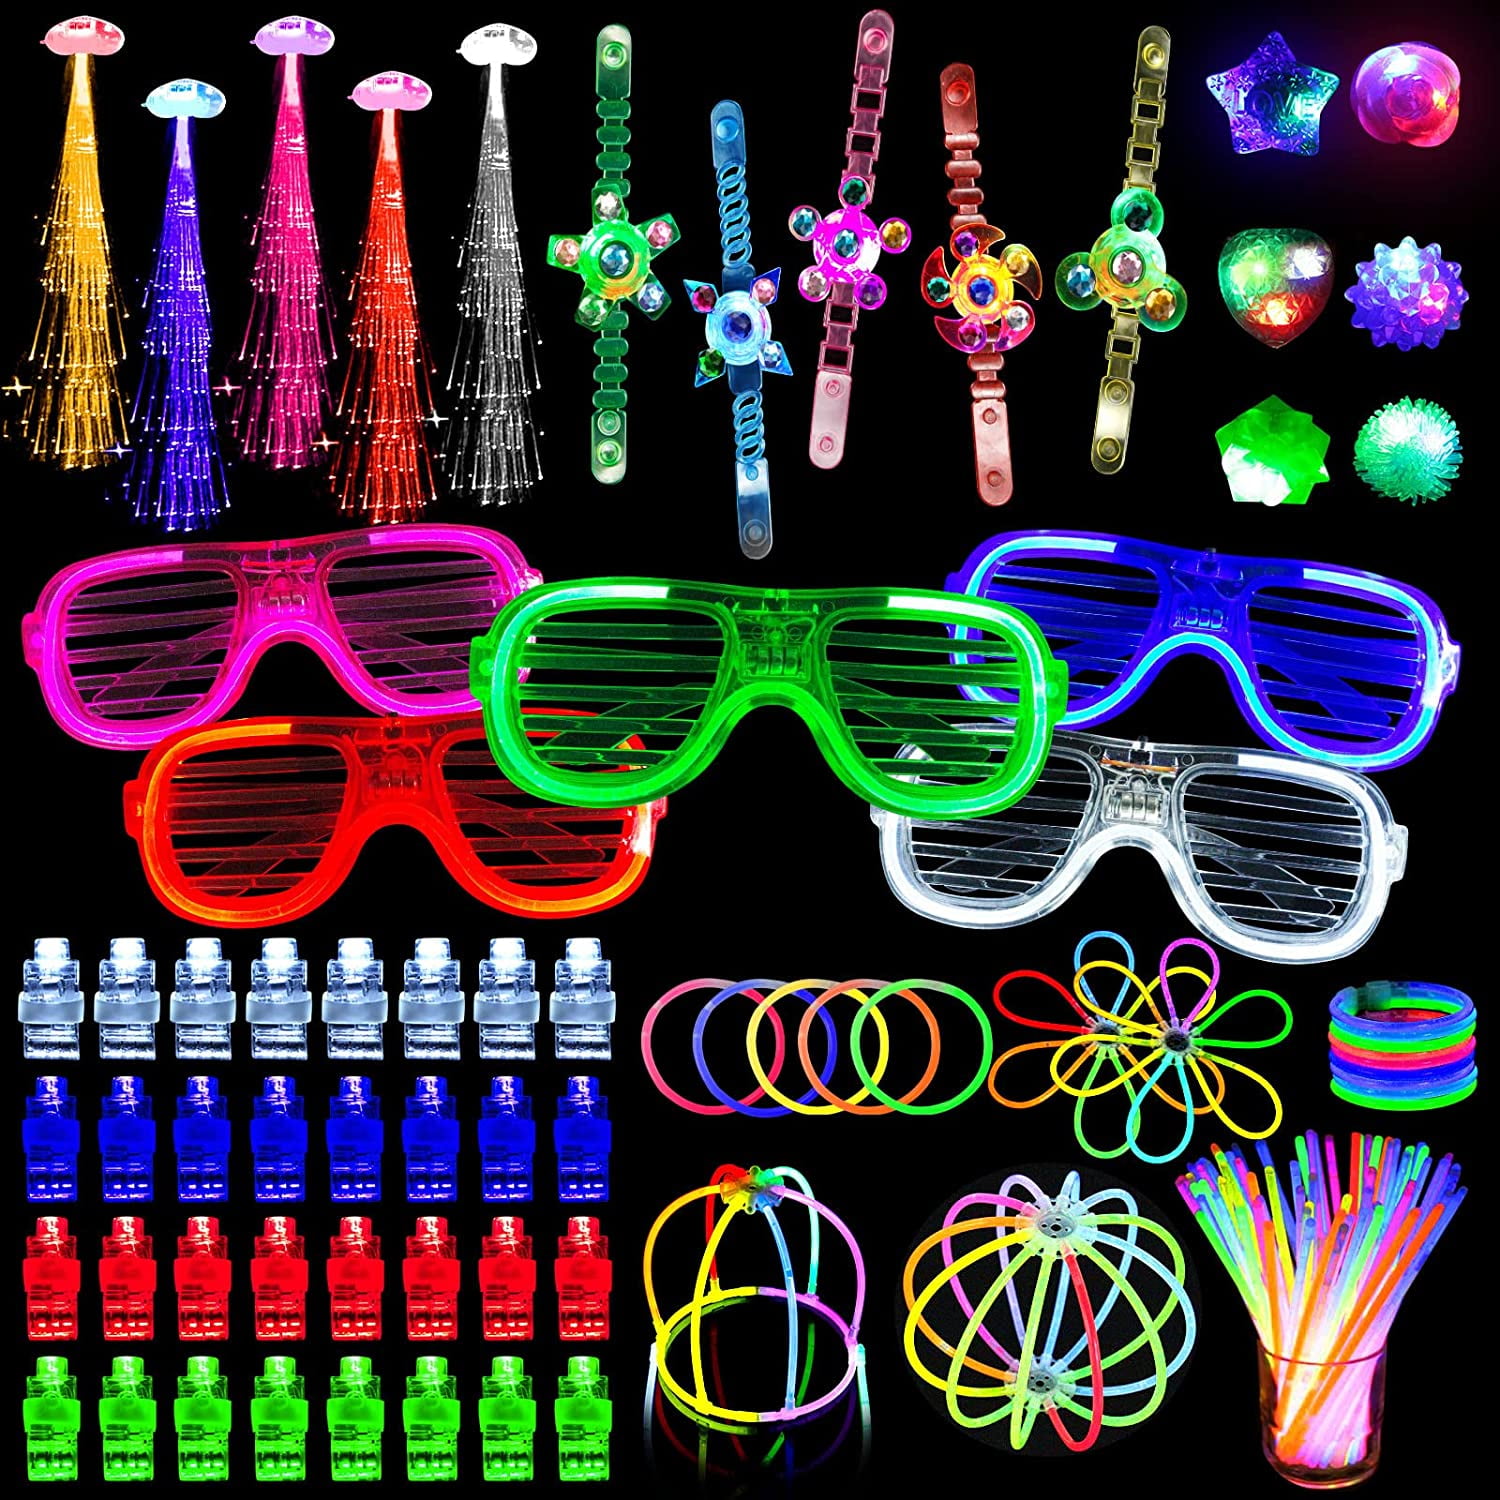 100 Pieces Halloween LED Glow Bracelets Set, Neon Glow in the Dark Party  Supplies, Light Up Party Favors, Gifts for Kids, Adults, Glow Accessories